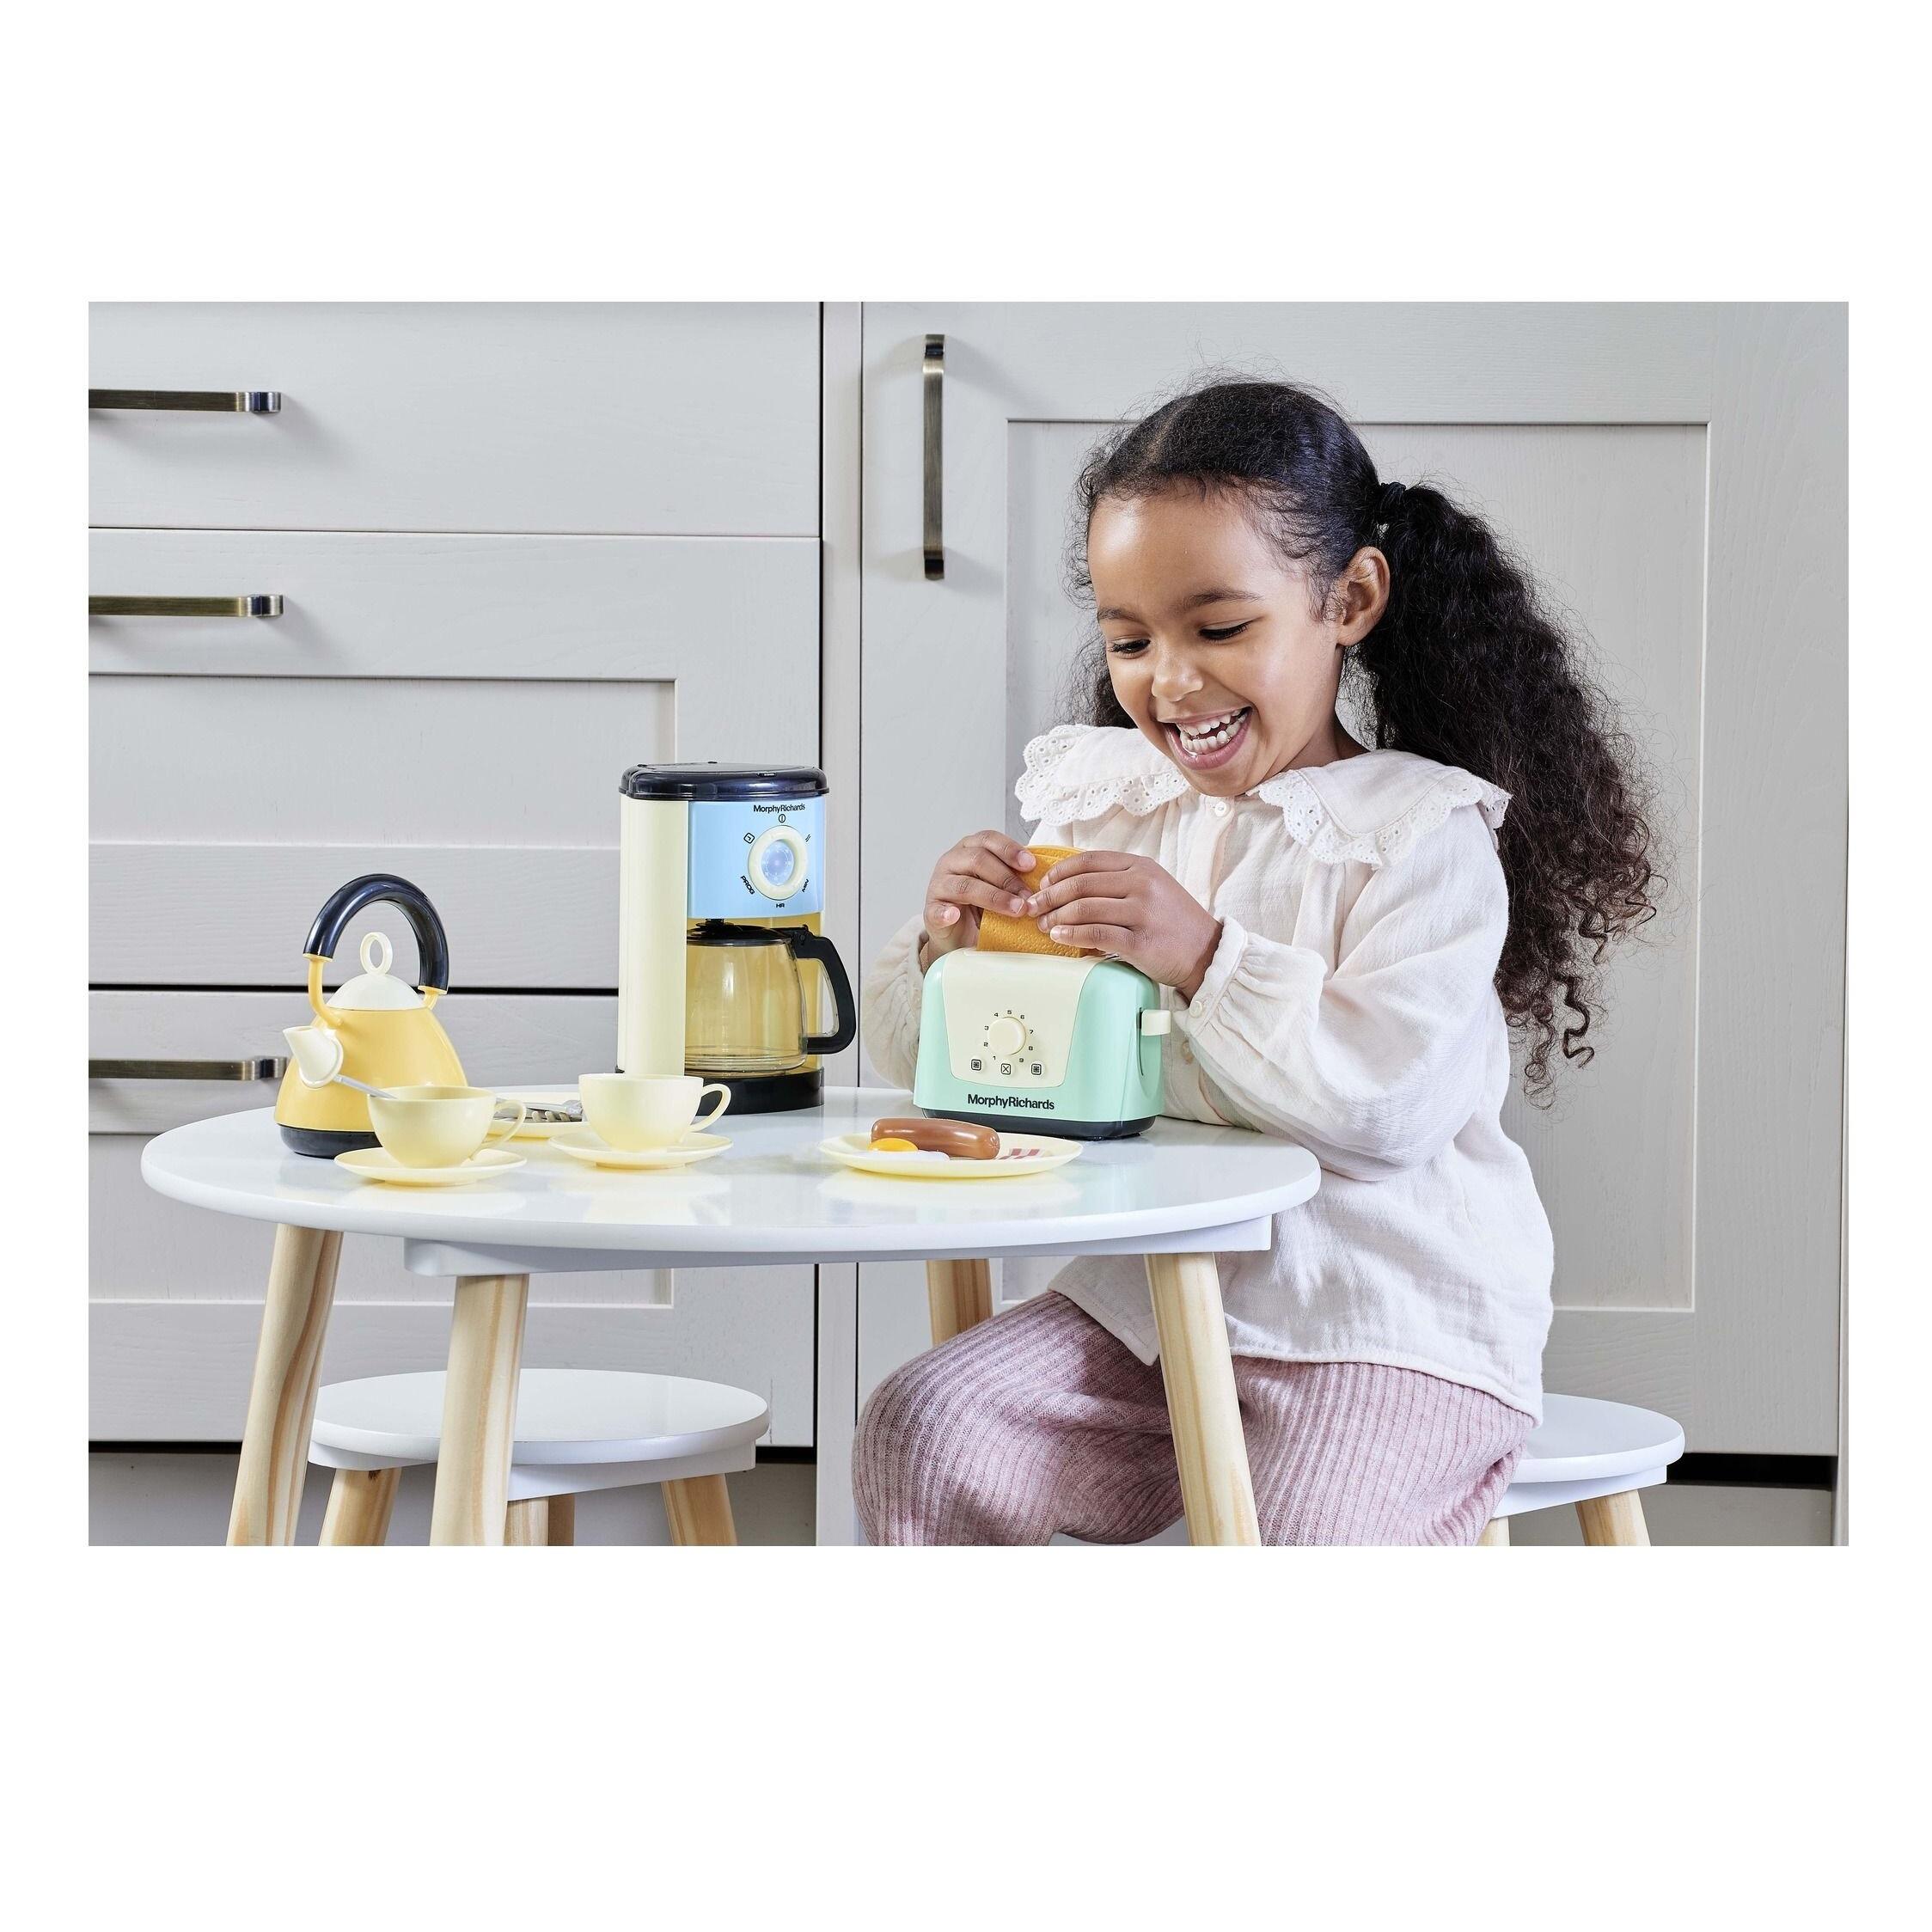 Morphy Richards Kitchen Playset | Kettle, Toaster, Coffee Maker